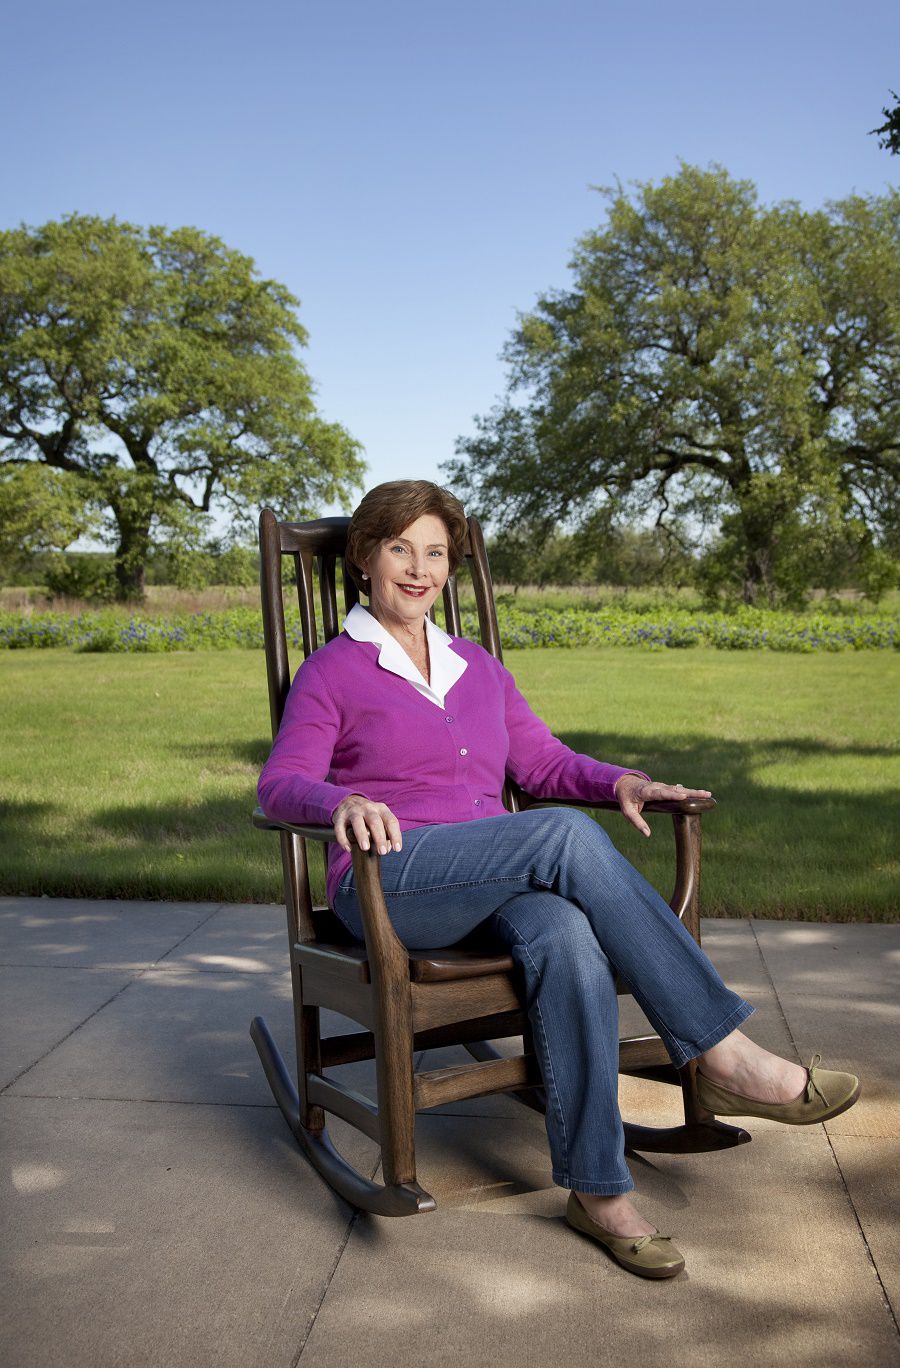 Former First Lady Laura Bush photographed on April 26, 2010, at the ranch in Crawford, Texas. She is seated in a rocking chair that was part of a custom made pair given to the President and First Lady by senior staff on their last Christmas in office. The wood for the chairs is from their ranch. 